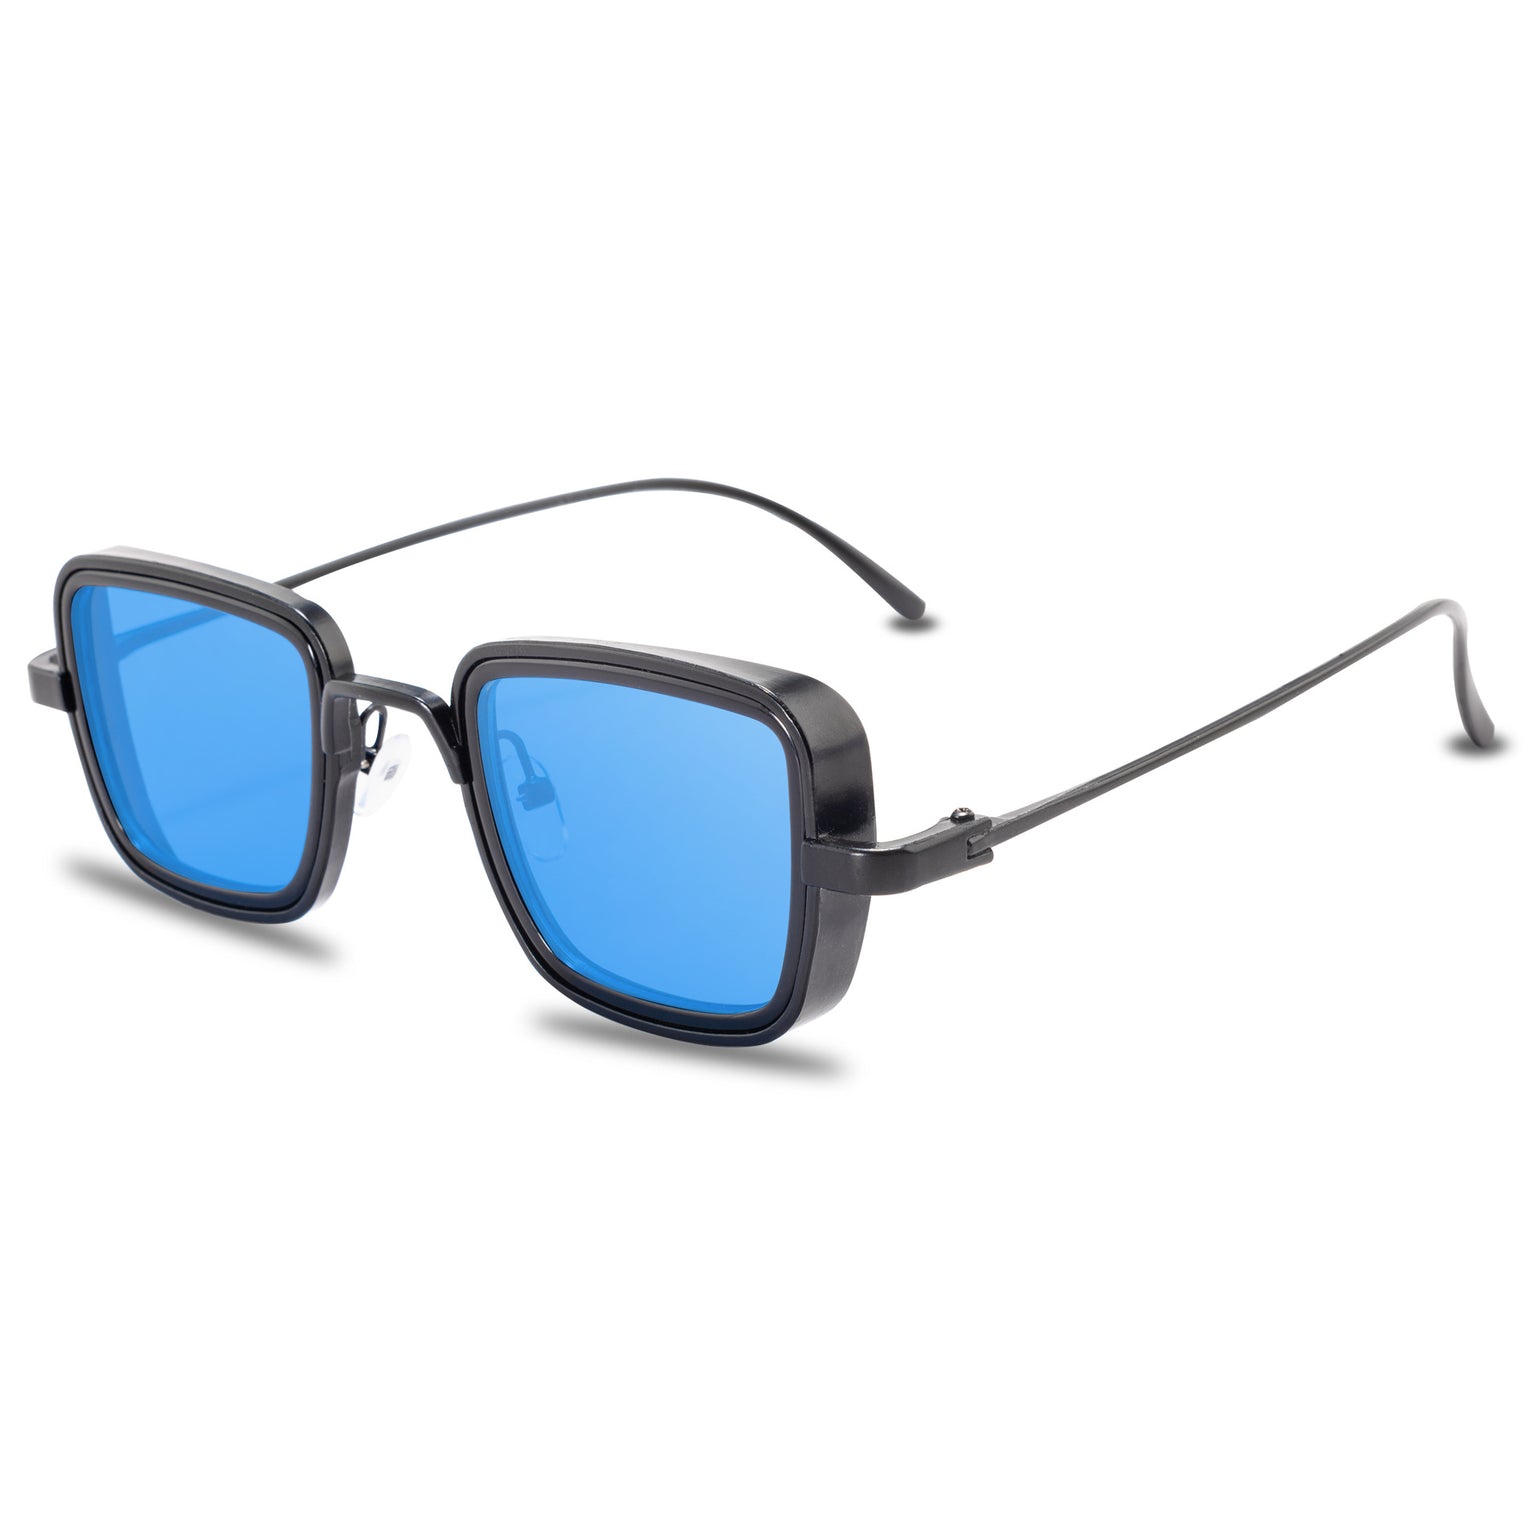 New Fashion Retro Creative Casual Men's Metal Square Frame Sunglasses For Outdoor Vacation